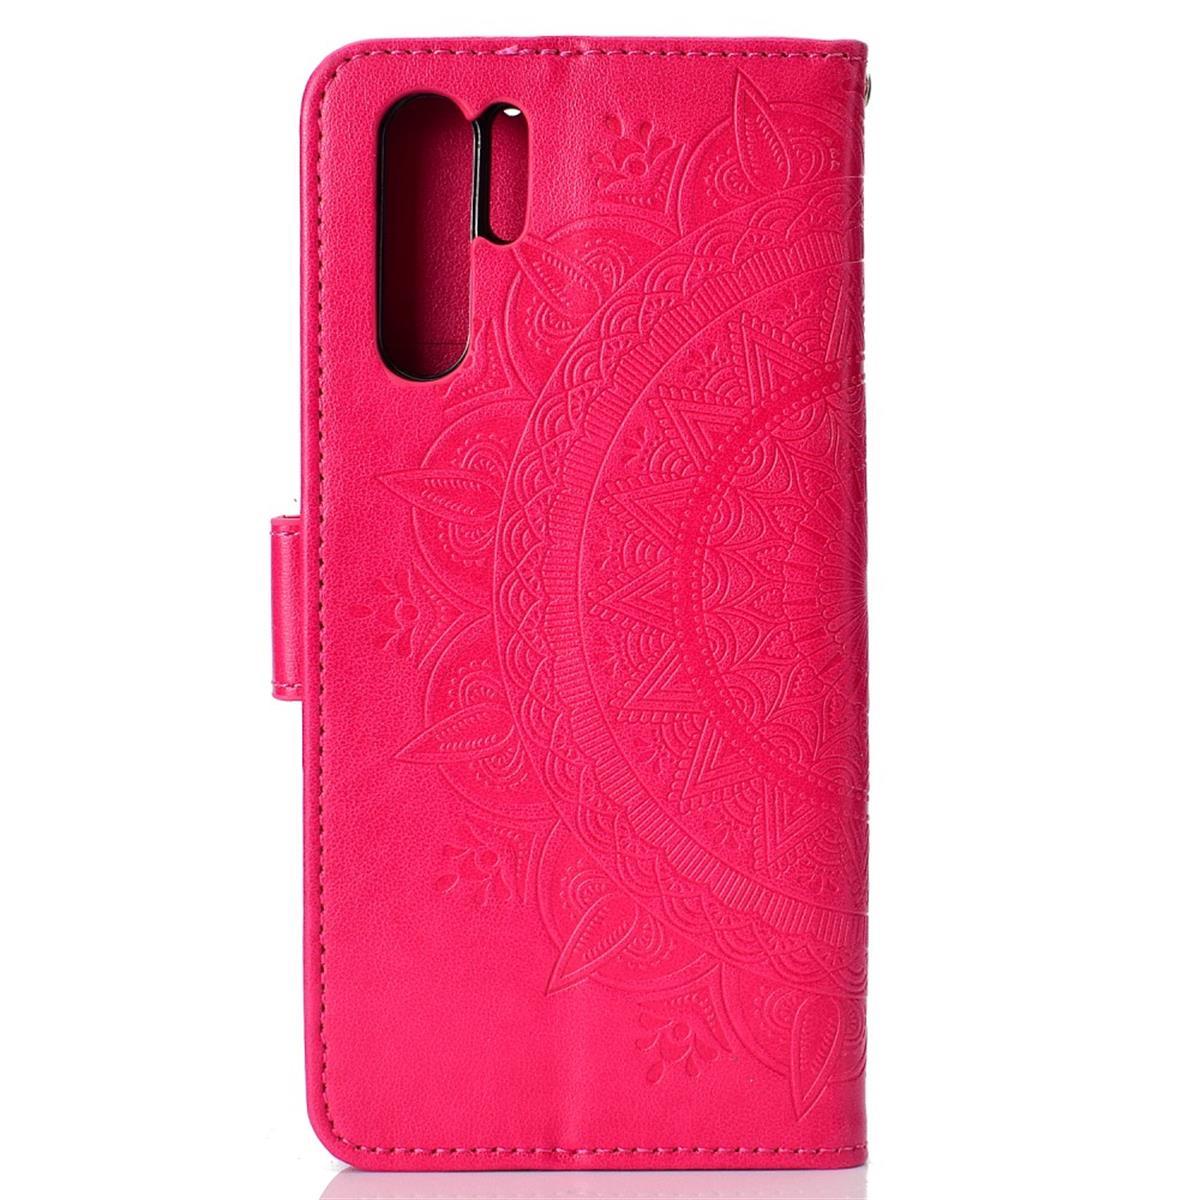 mit Pink P30 Bookcover, COVERKINGZ Pro, Mandala Huawei, Muster, Klapphülle